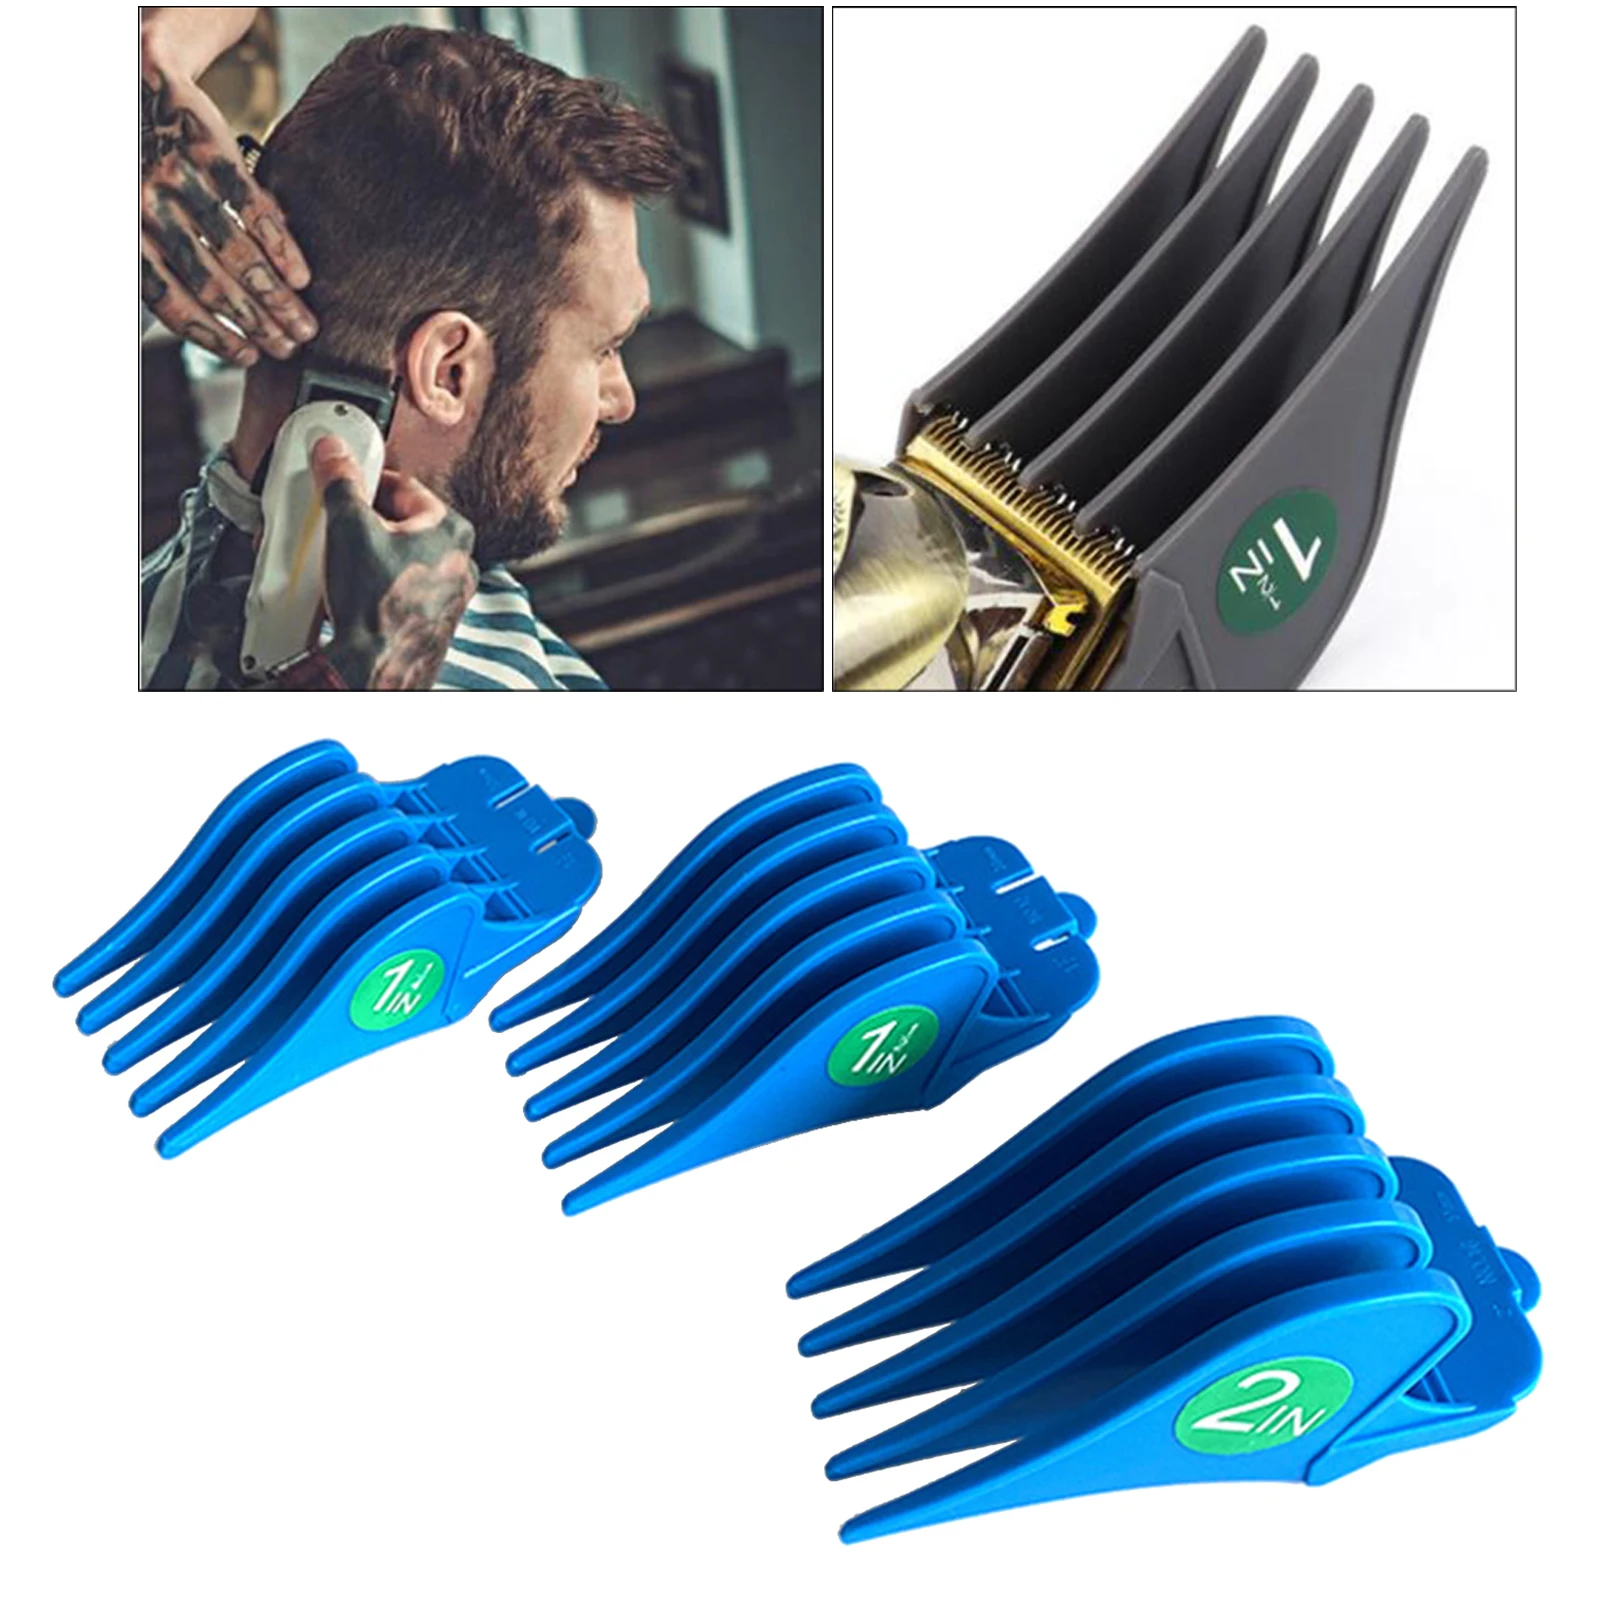 3Pcs Professional Hair Trimmer Clipper Guard Combs Guide Combs Cutting Guides Combs for Hair Clippers/Trimmers Attachment